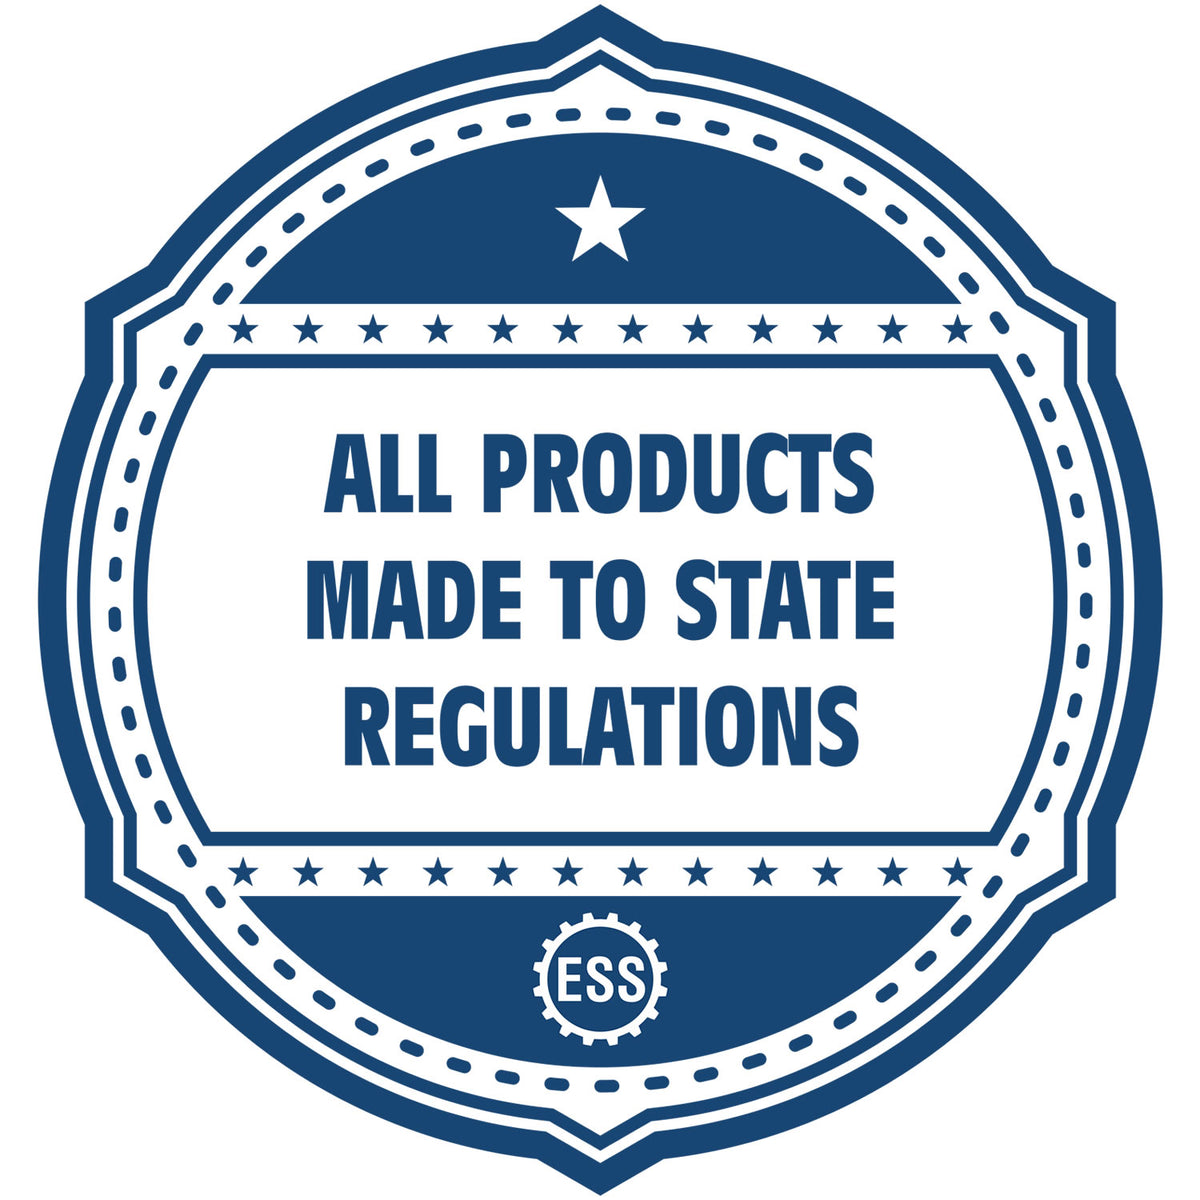 A blue icon or badge for the Slim Pre-Inked Utah Professional Geologist Seal Stamp showing that this product is made in compliance with state regulations.